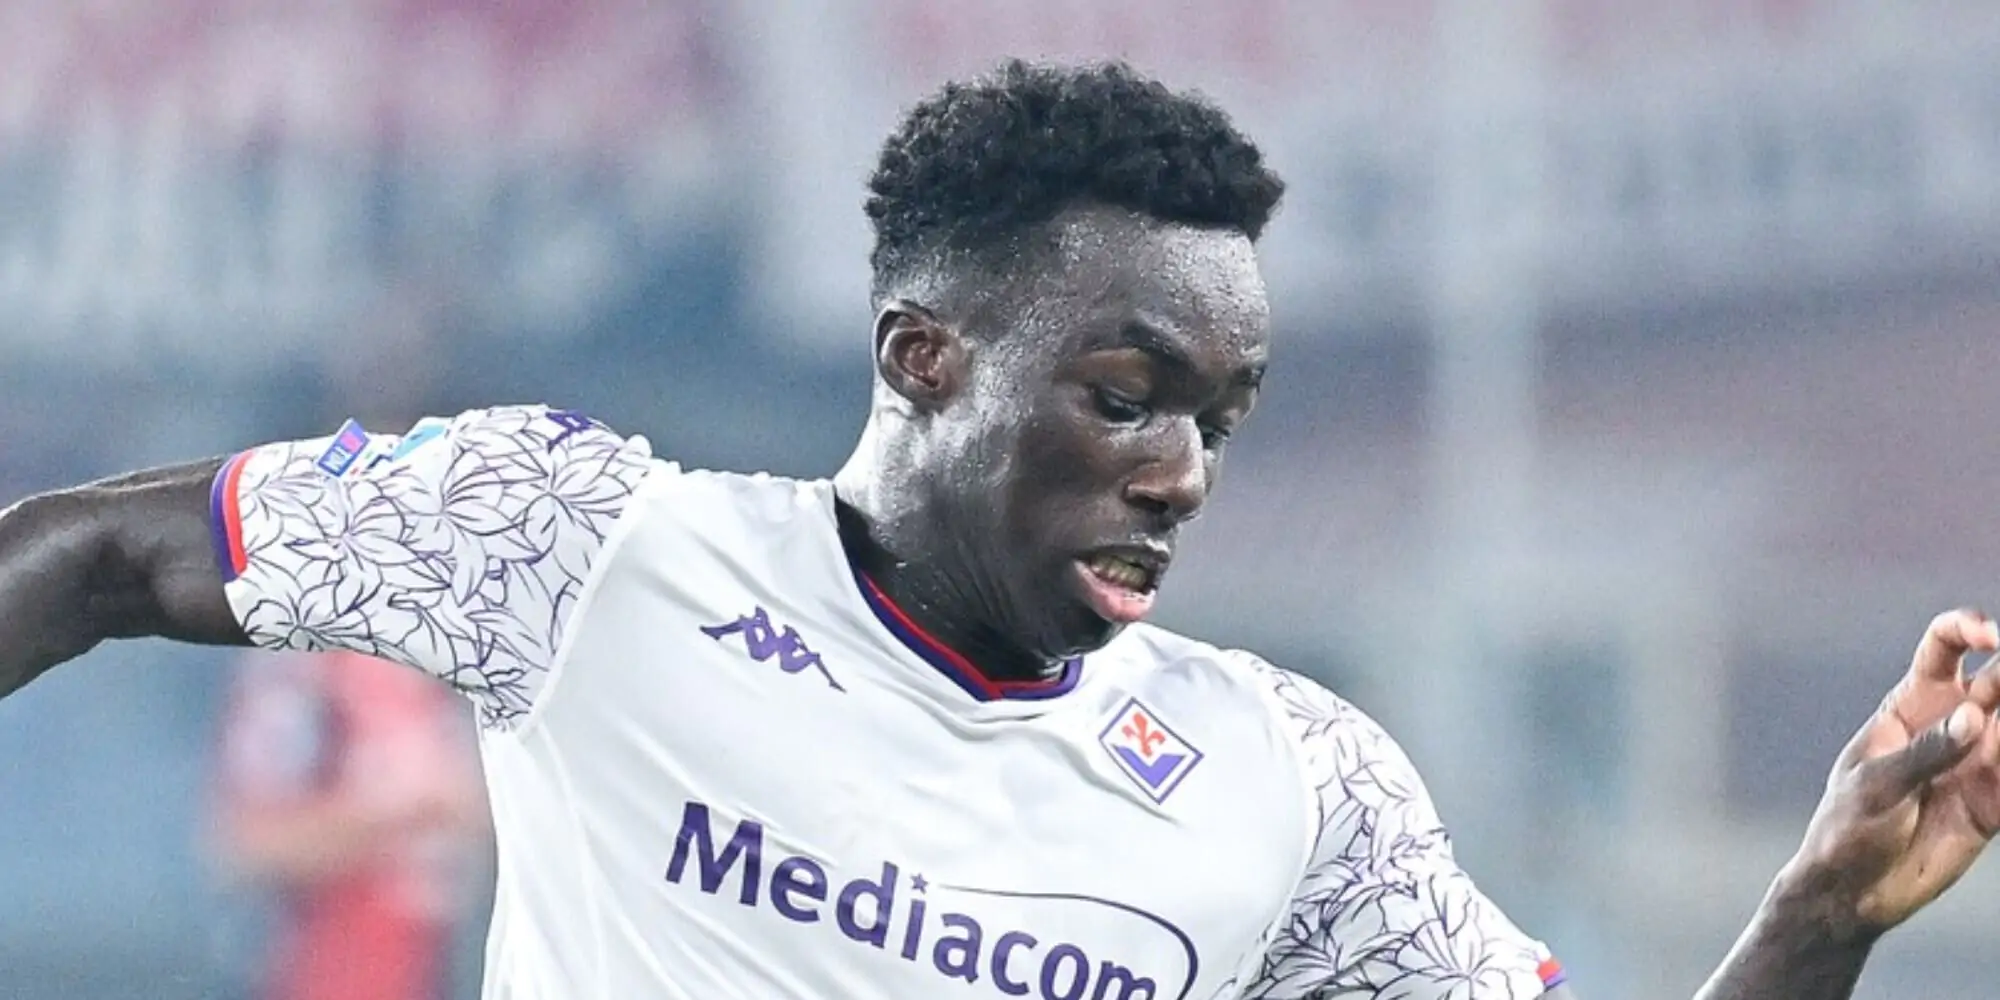 Fiorentina lost Dodo potentially for the rest of the season because of an ACL tear. The fullback had started all but two games so far.